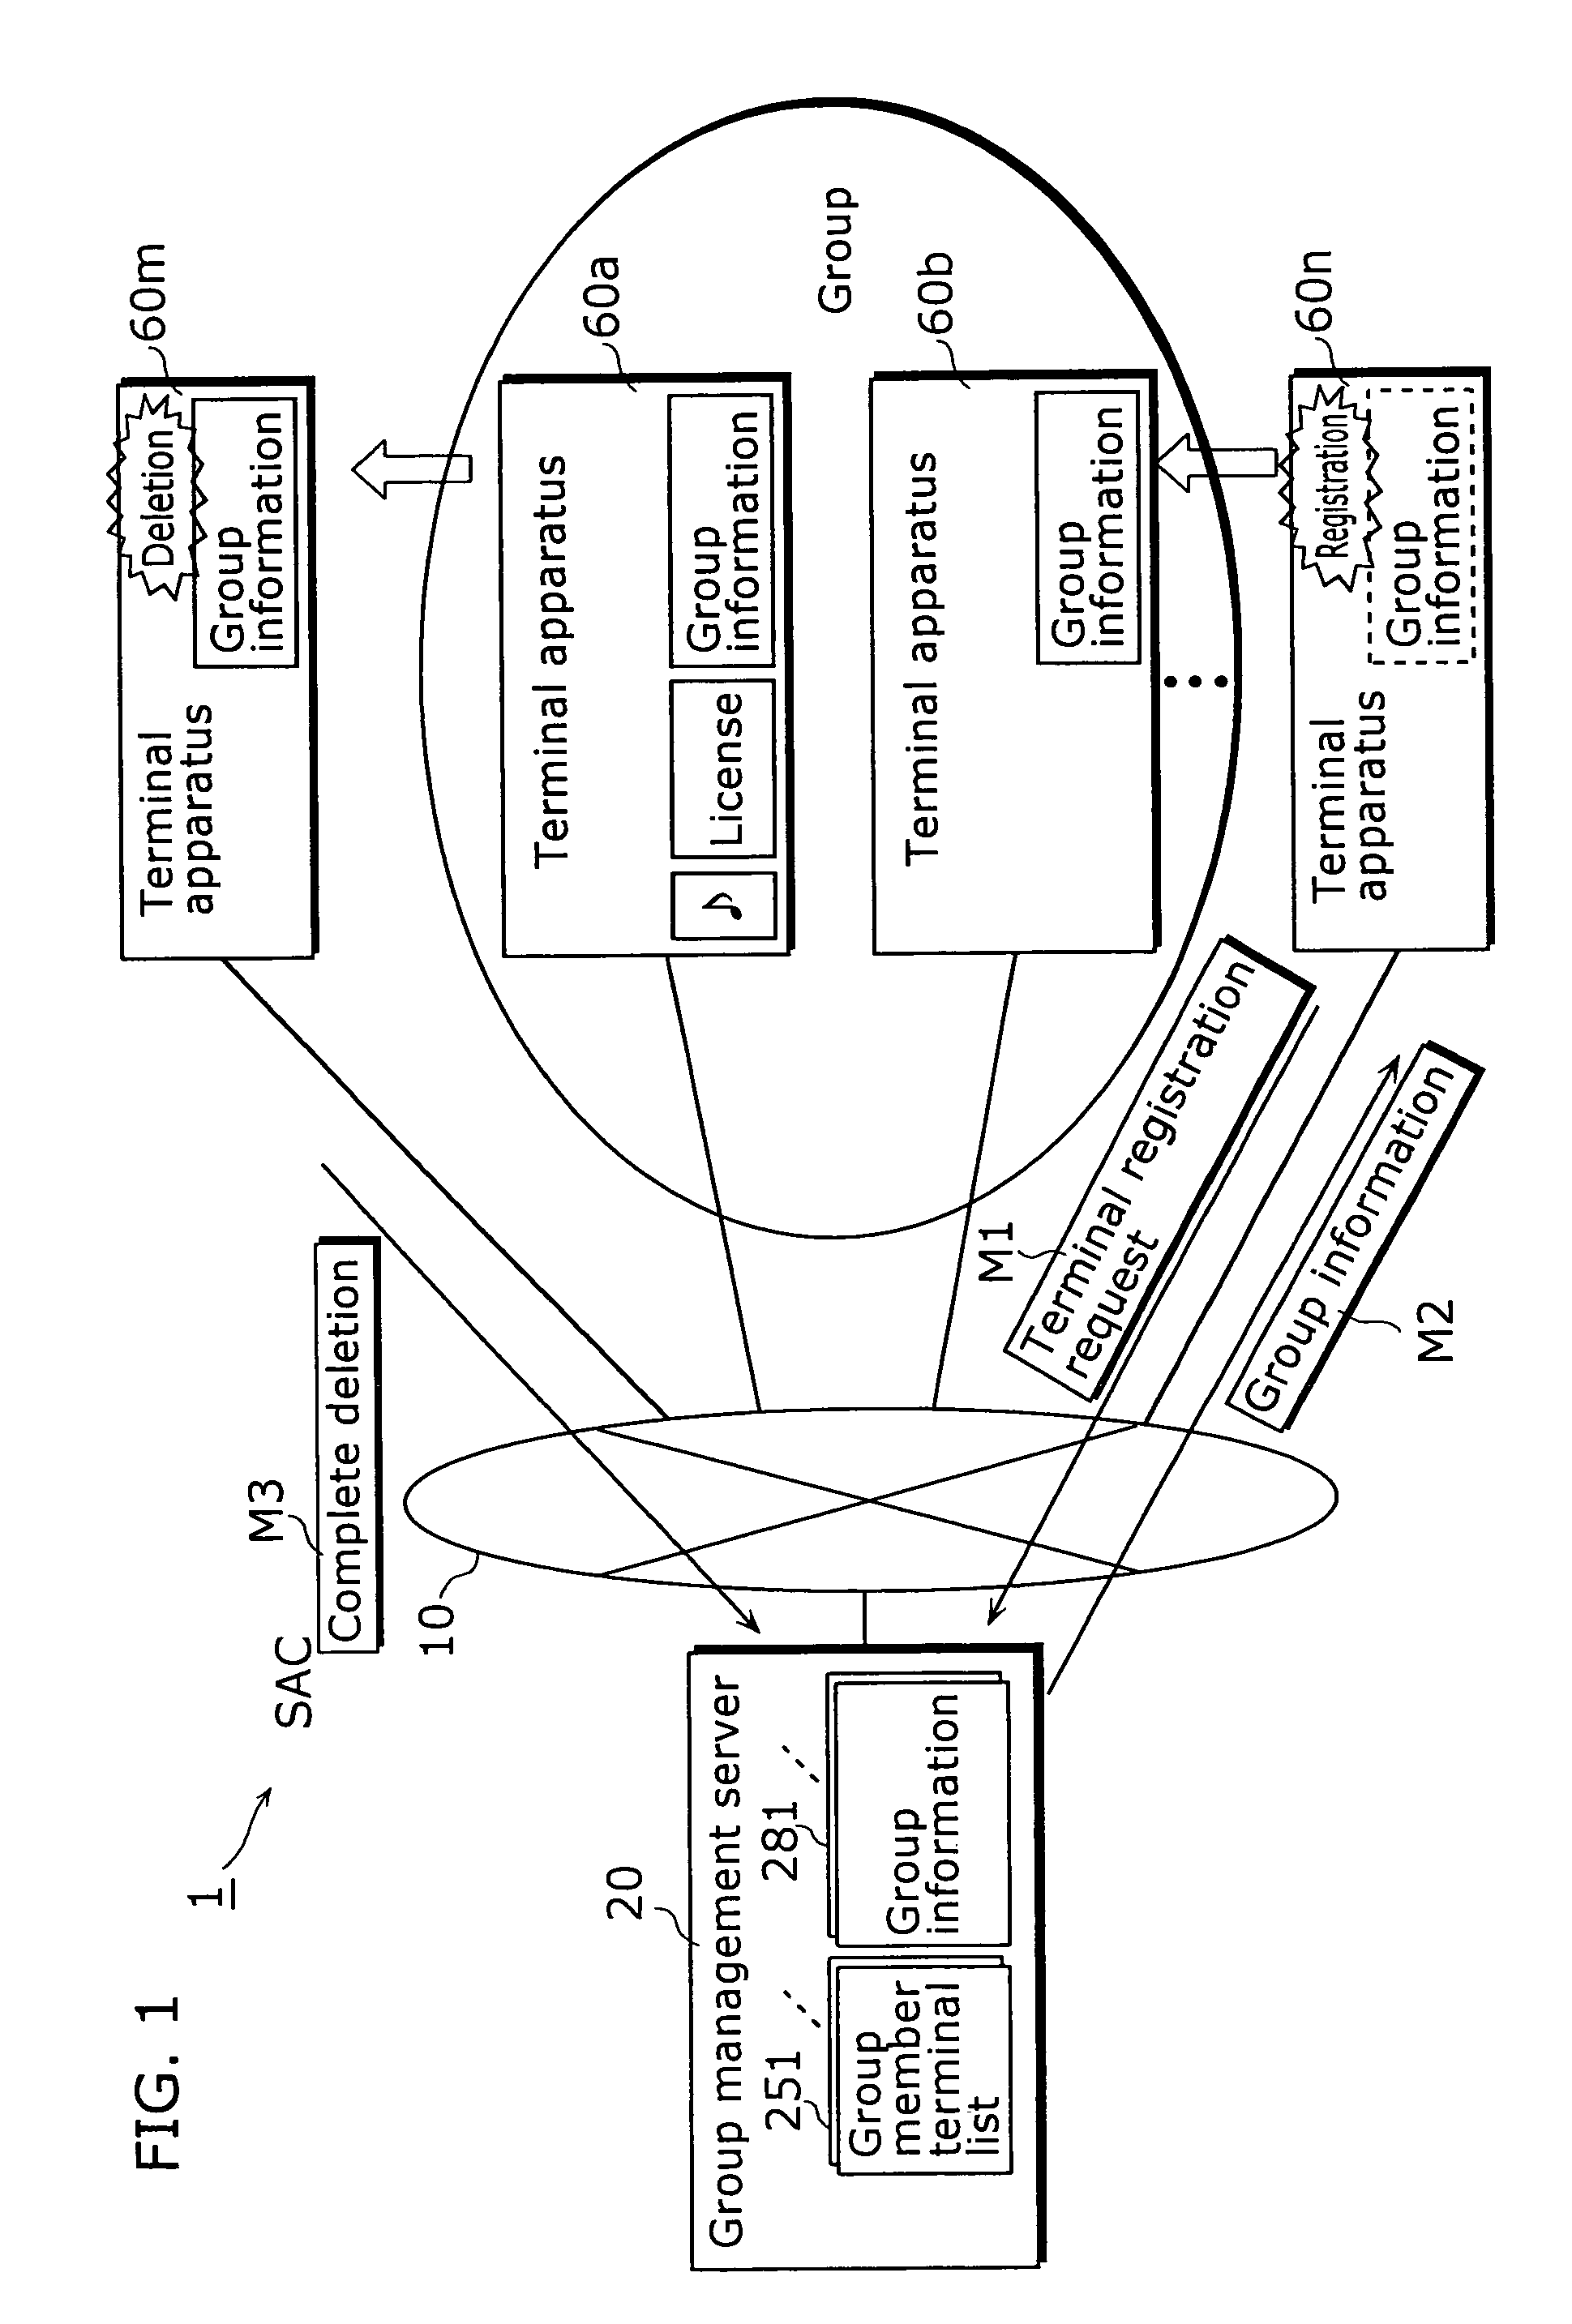 Information management system having a common management server for establishing secure communication among groups formed out of a plurality of terminals